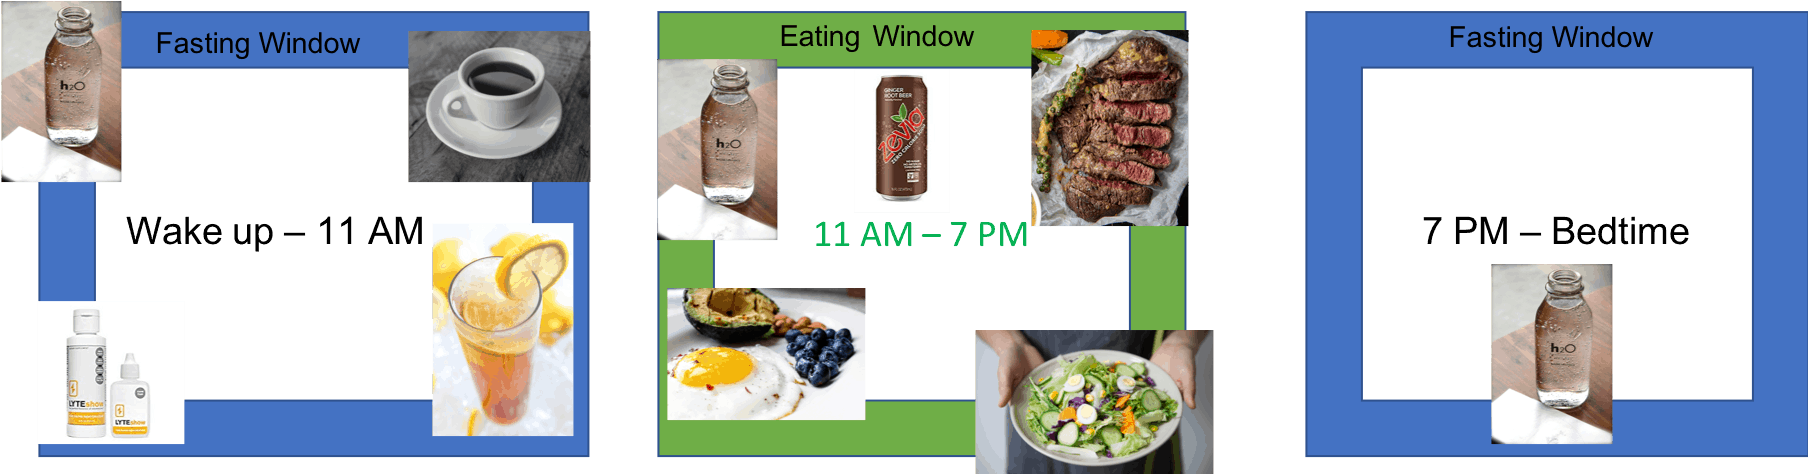 fasting window Intermittent Fasting For Women Over 40 Or 50